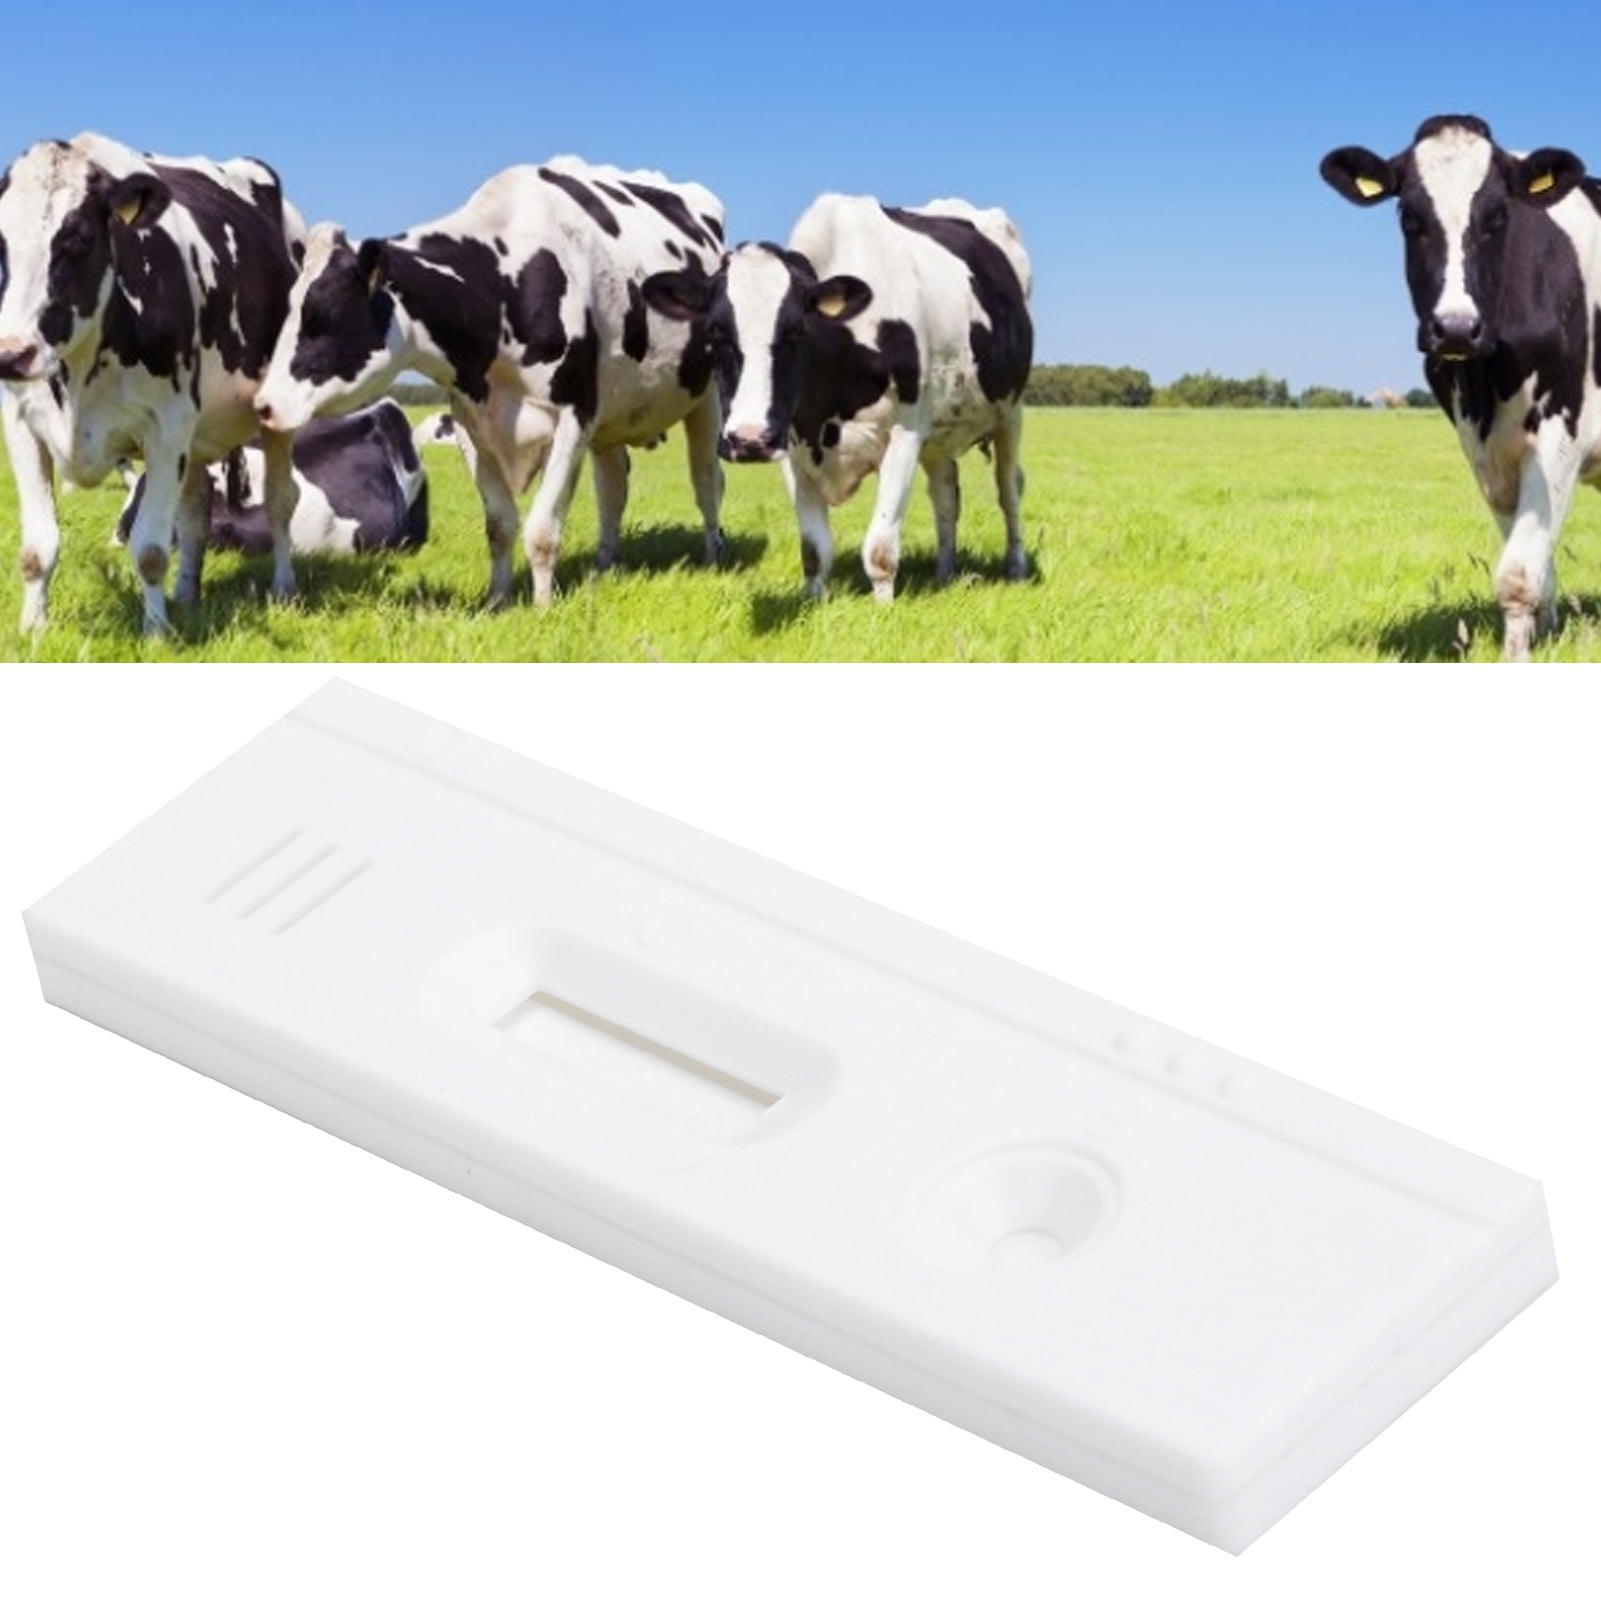 Pregnancy test for cattle 